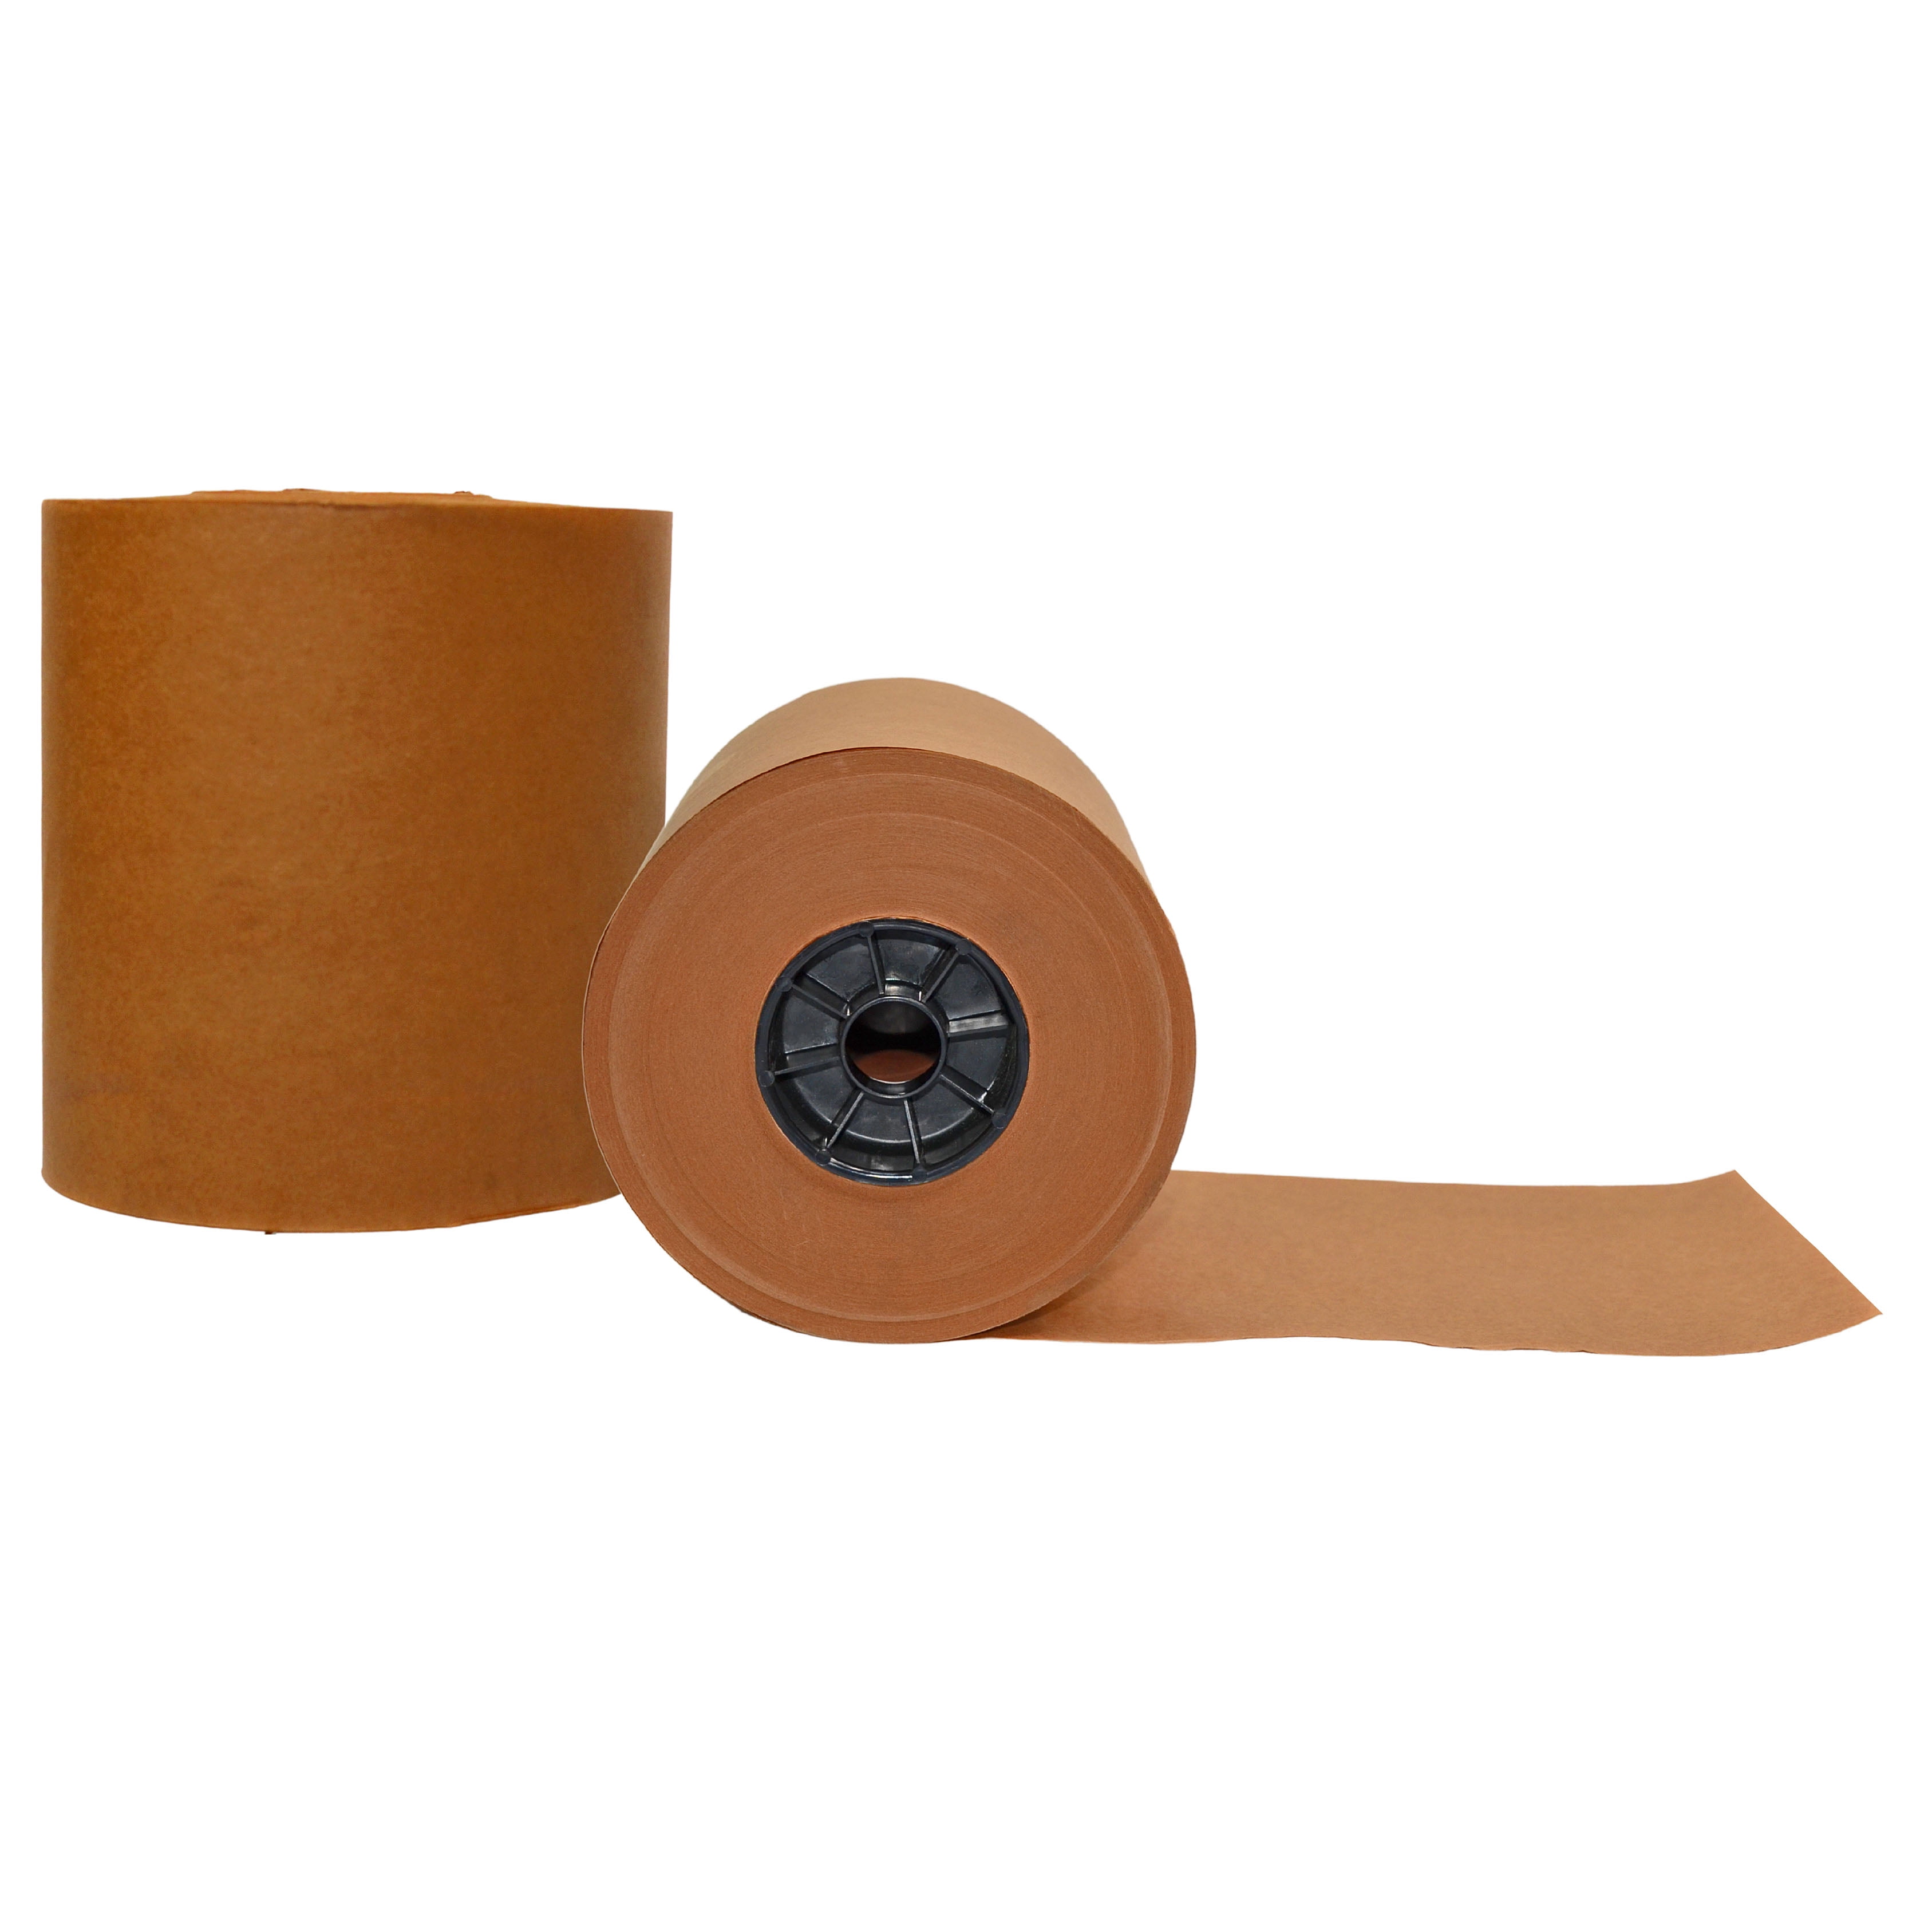 Wod Tape Brown Kraft Paper Roll - 24 inch x 1000 Feet - Made in USA for Packaging Moving Storage Kpn-40